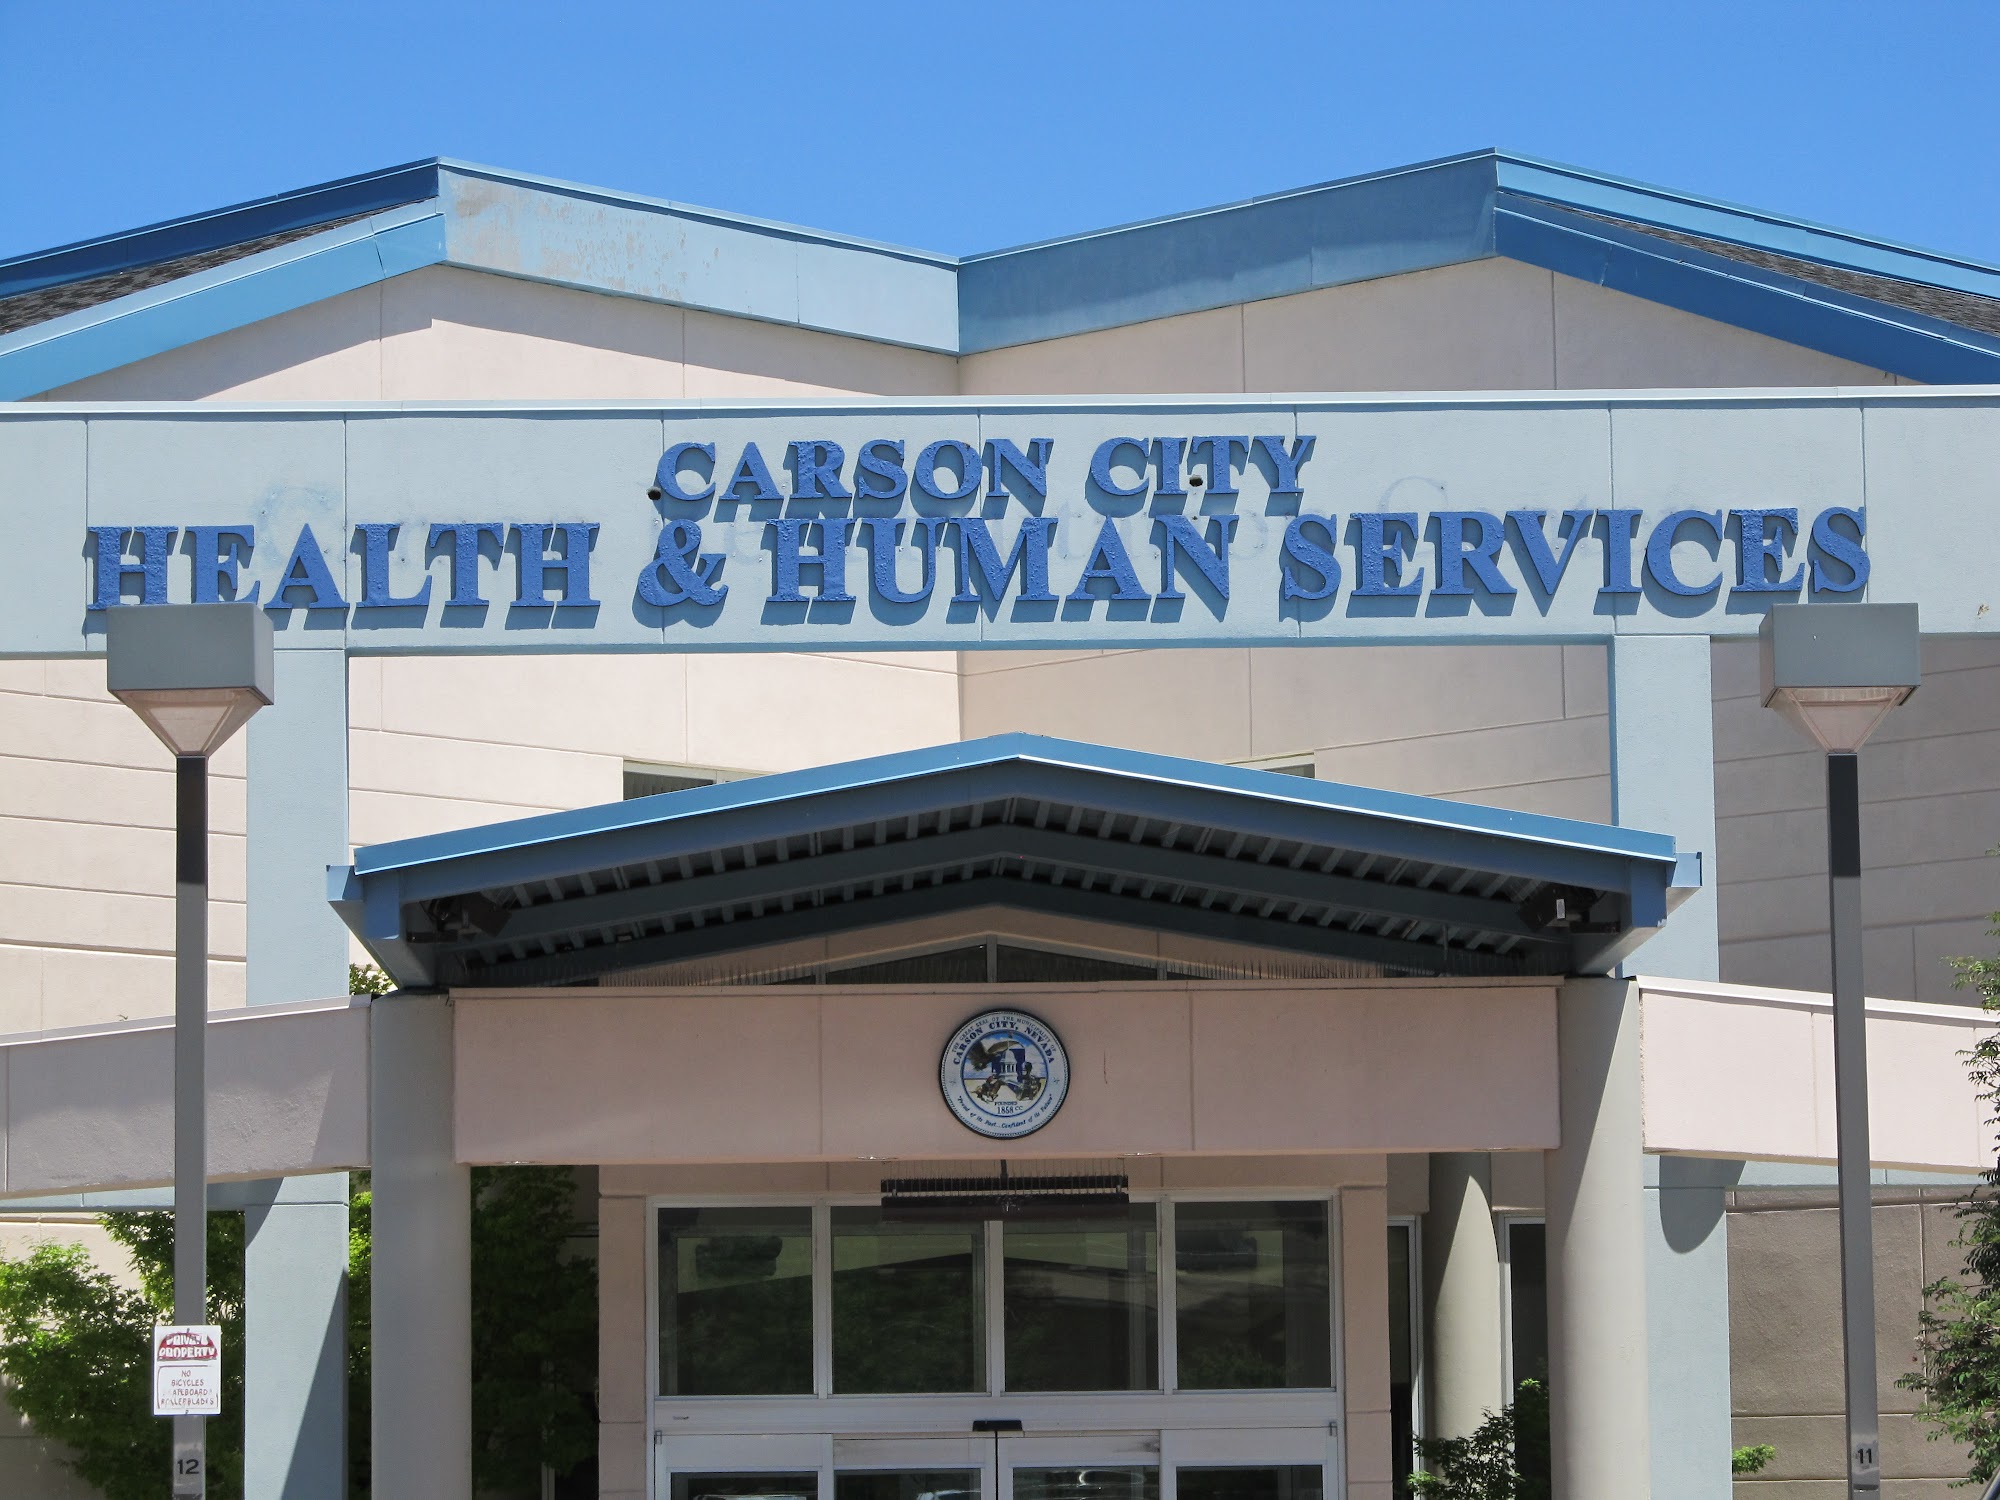 Carson City Health and Human Services